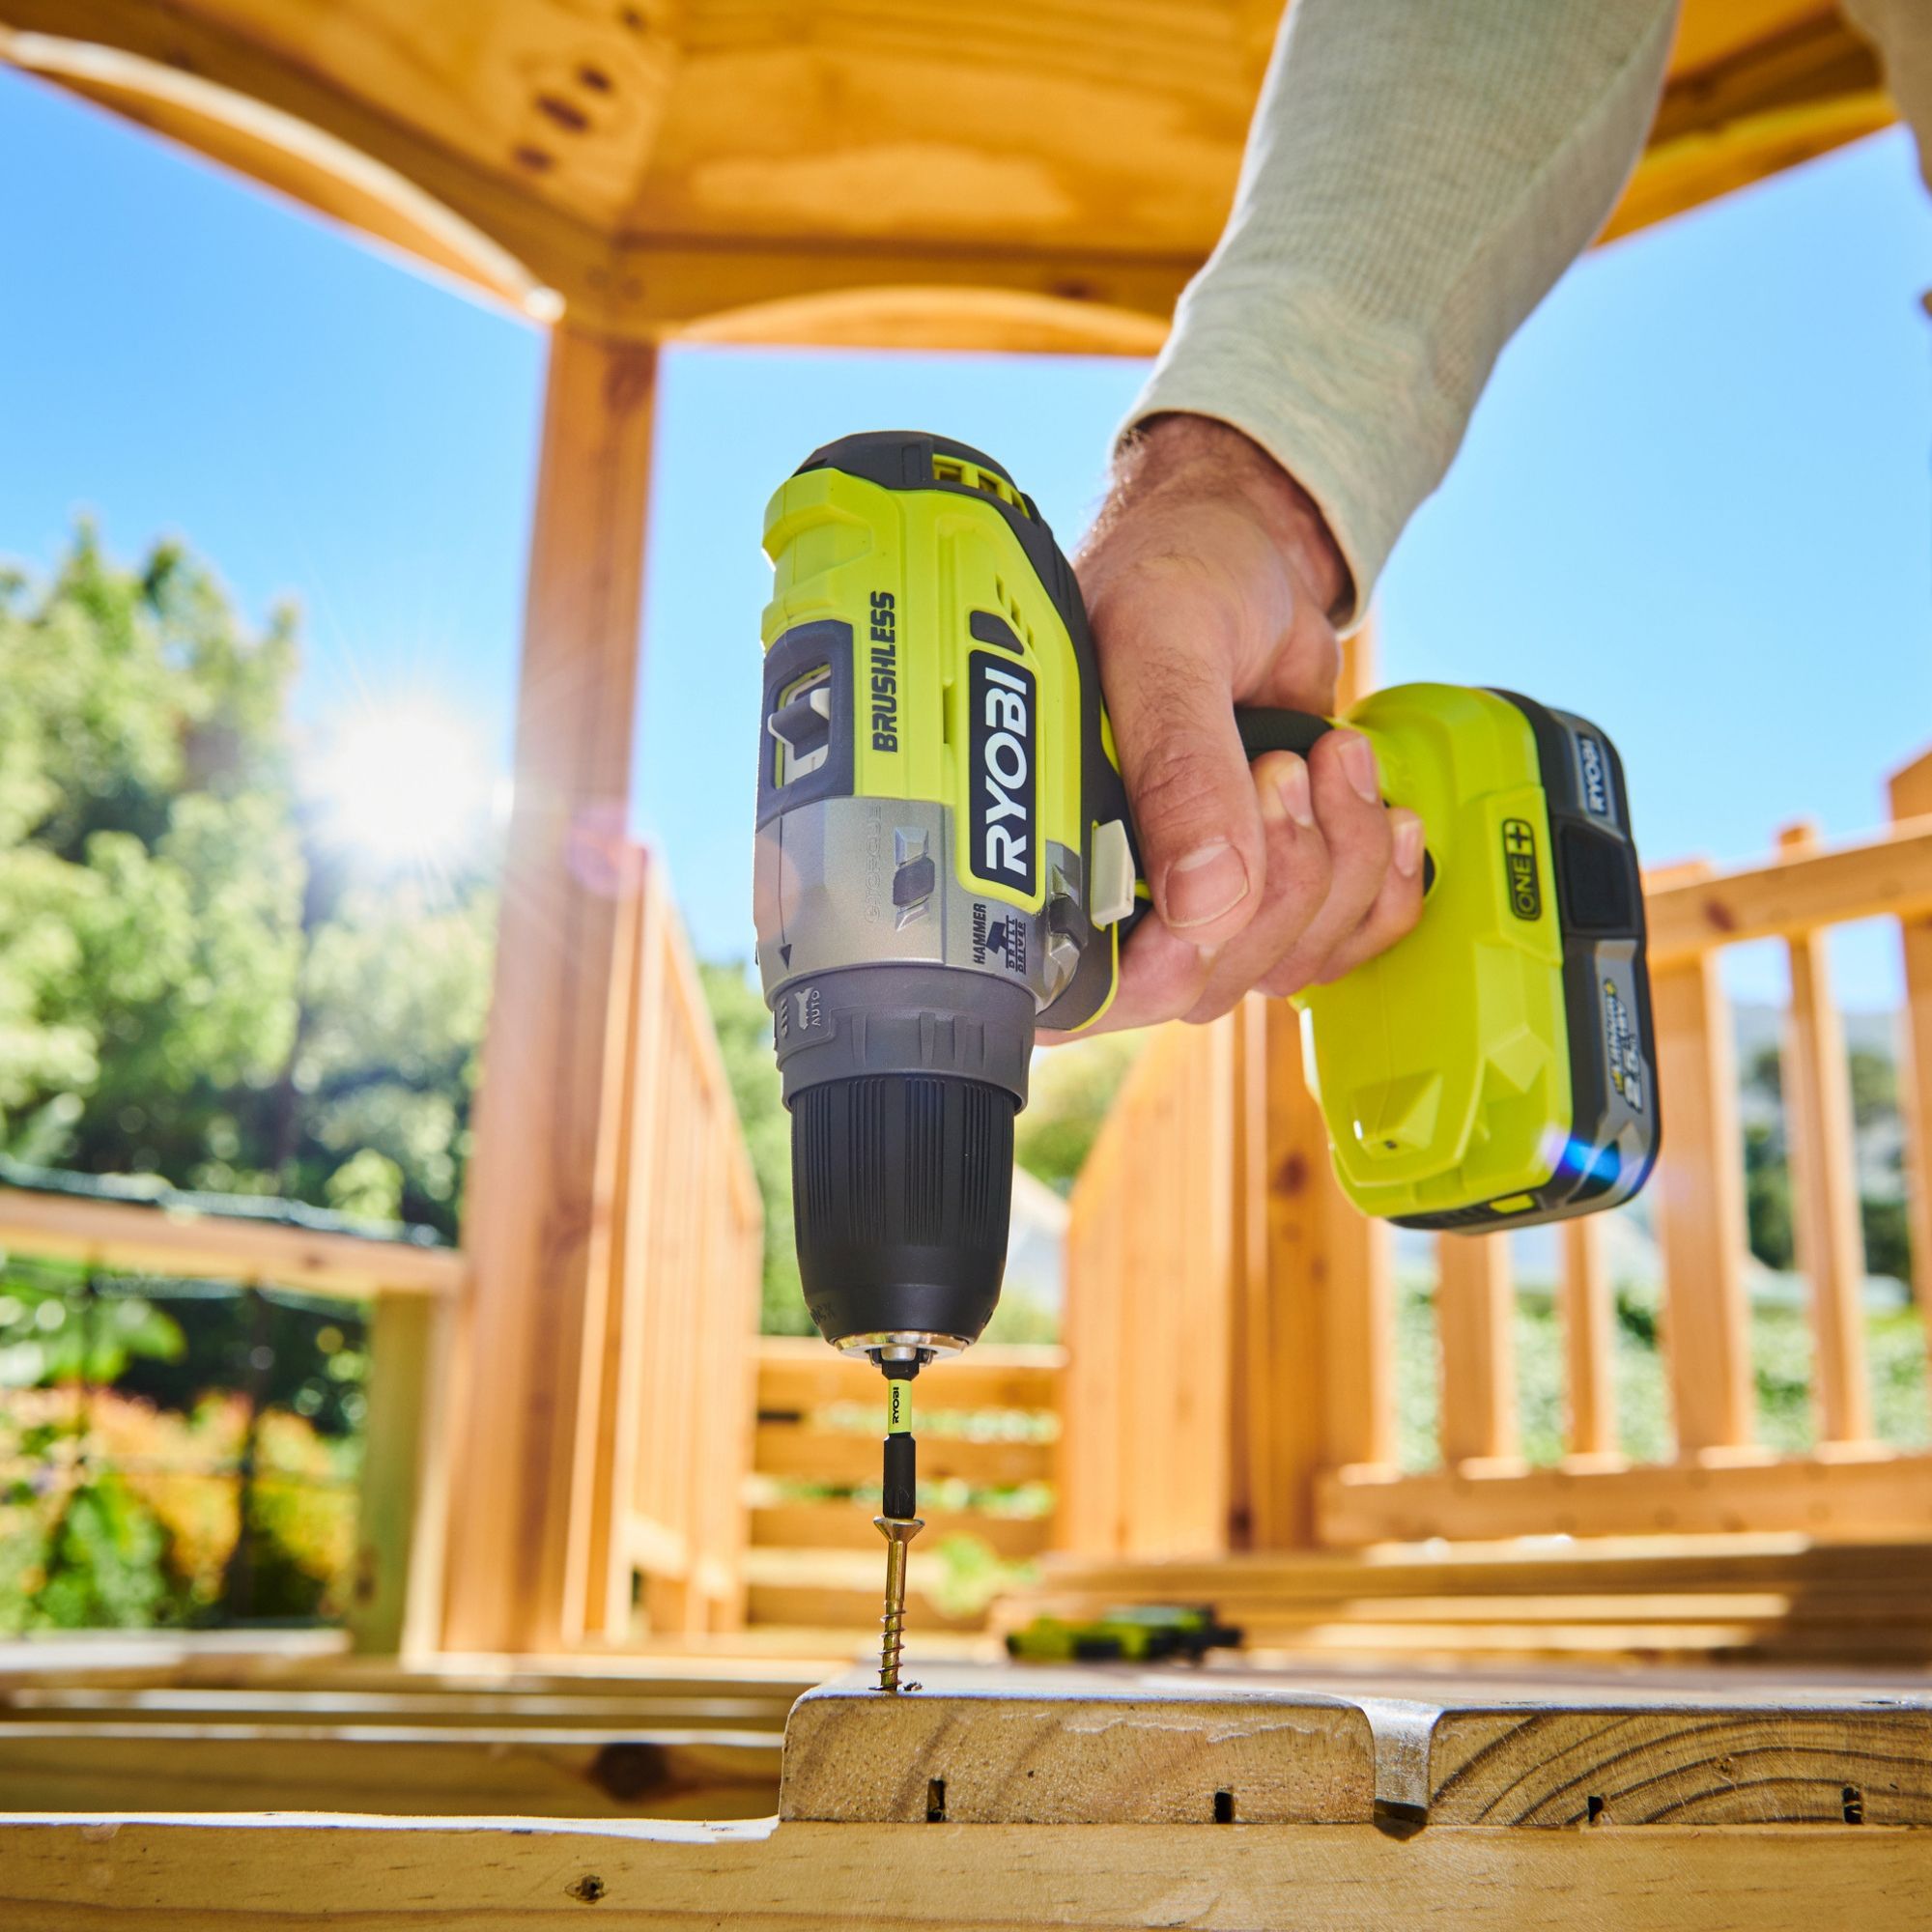 Ryobi R18PD3 Cordless Compact Drill: Tested (2024 Review UK)